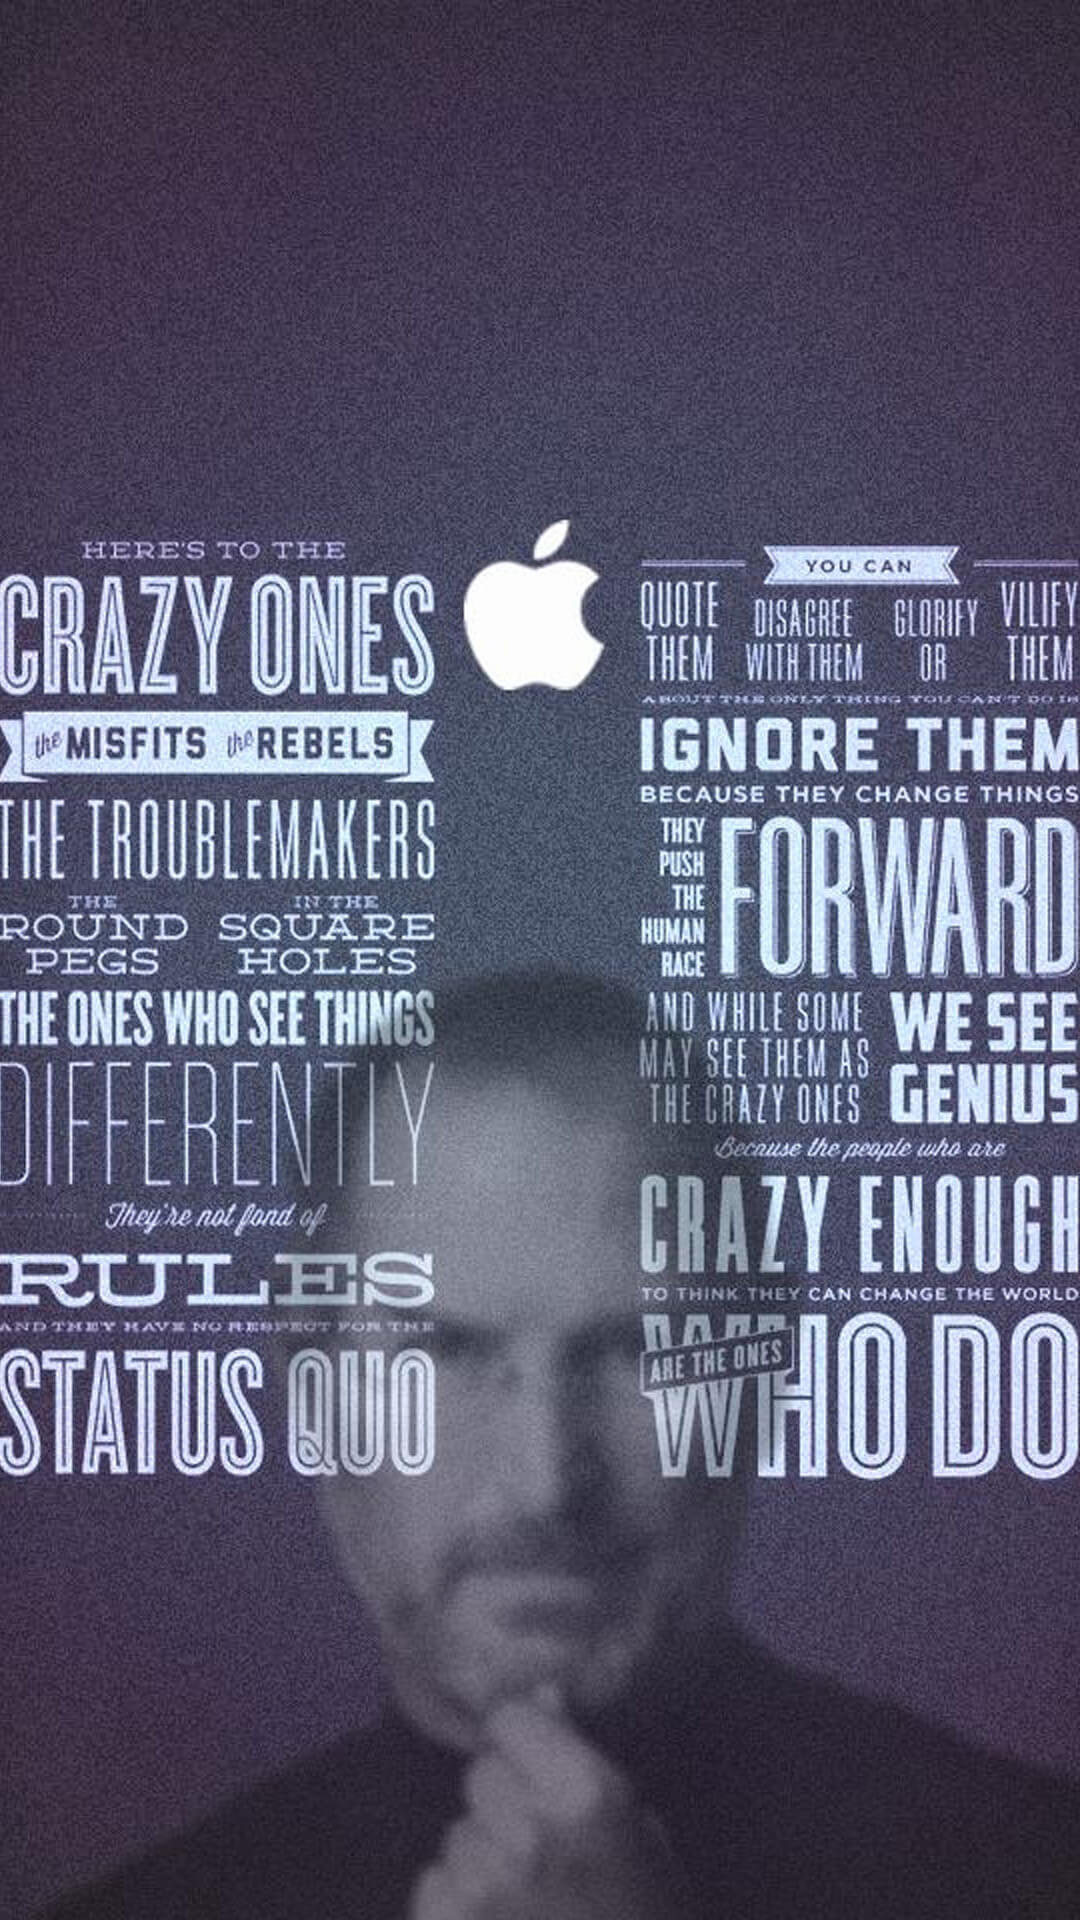 Steve Jobs Quotes Android wallpaper